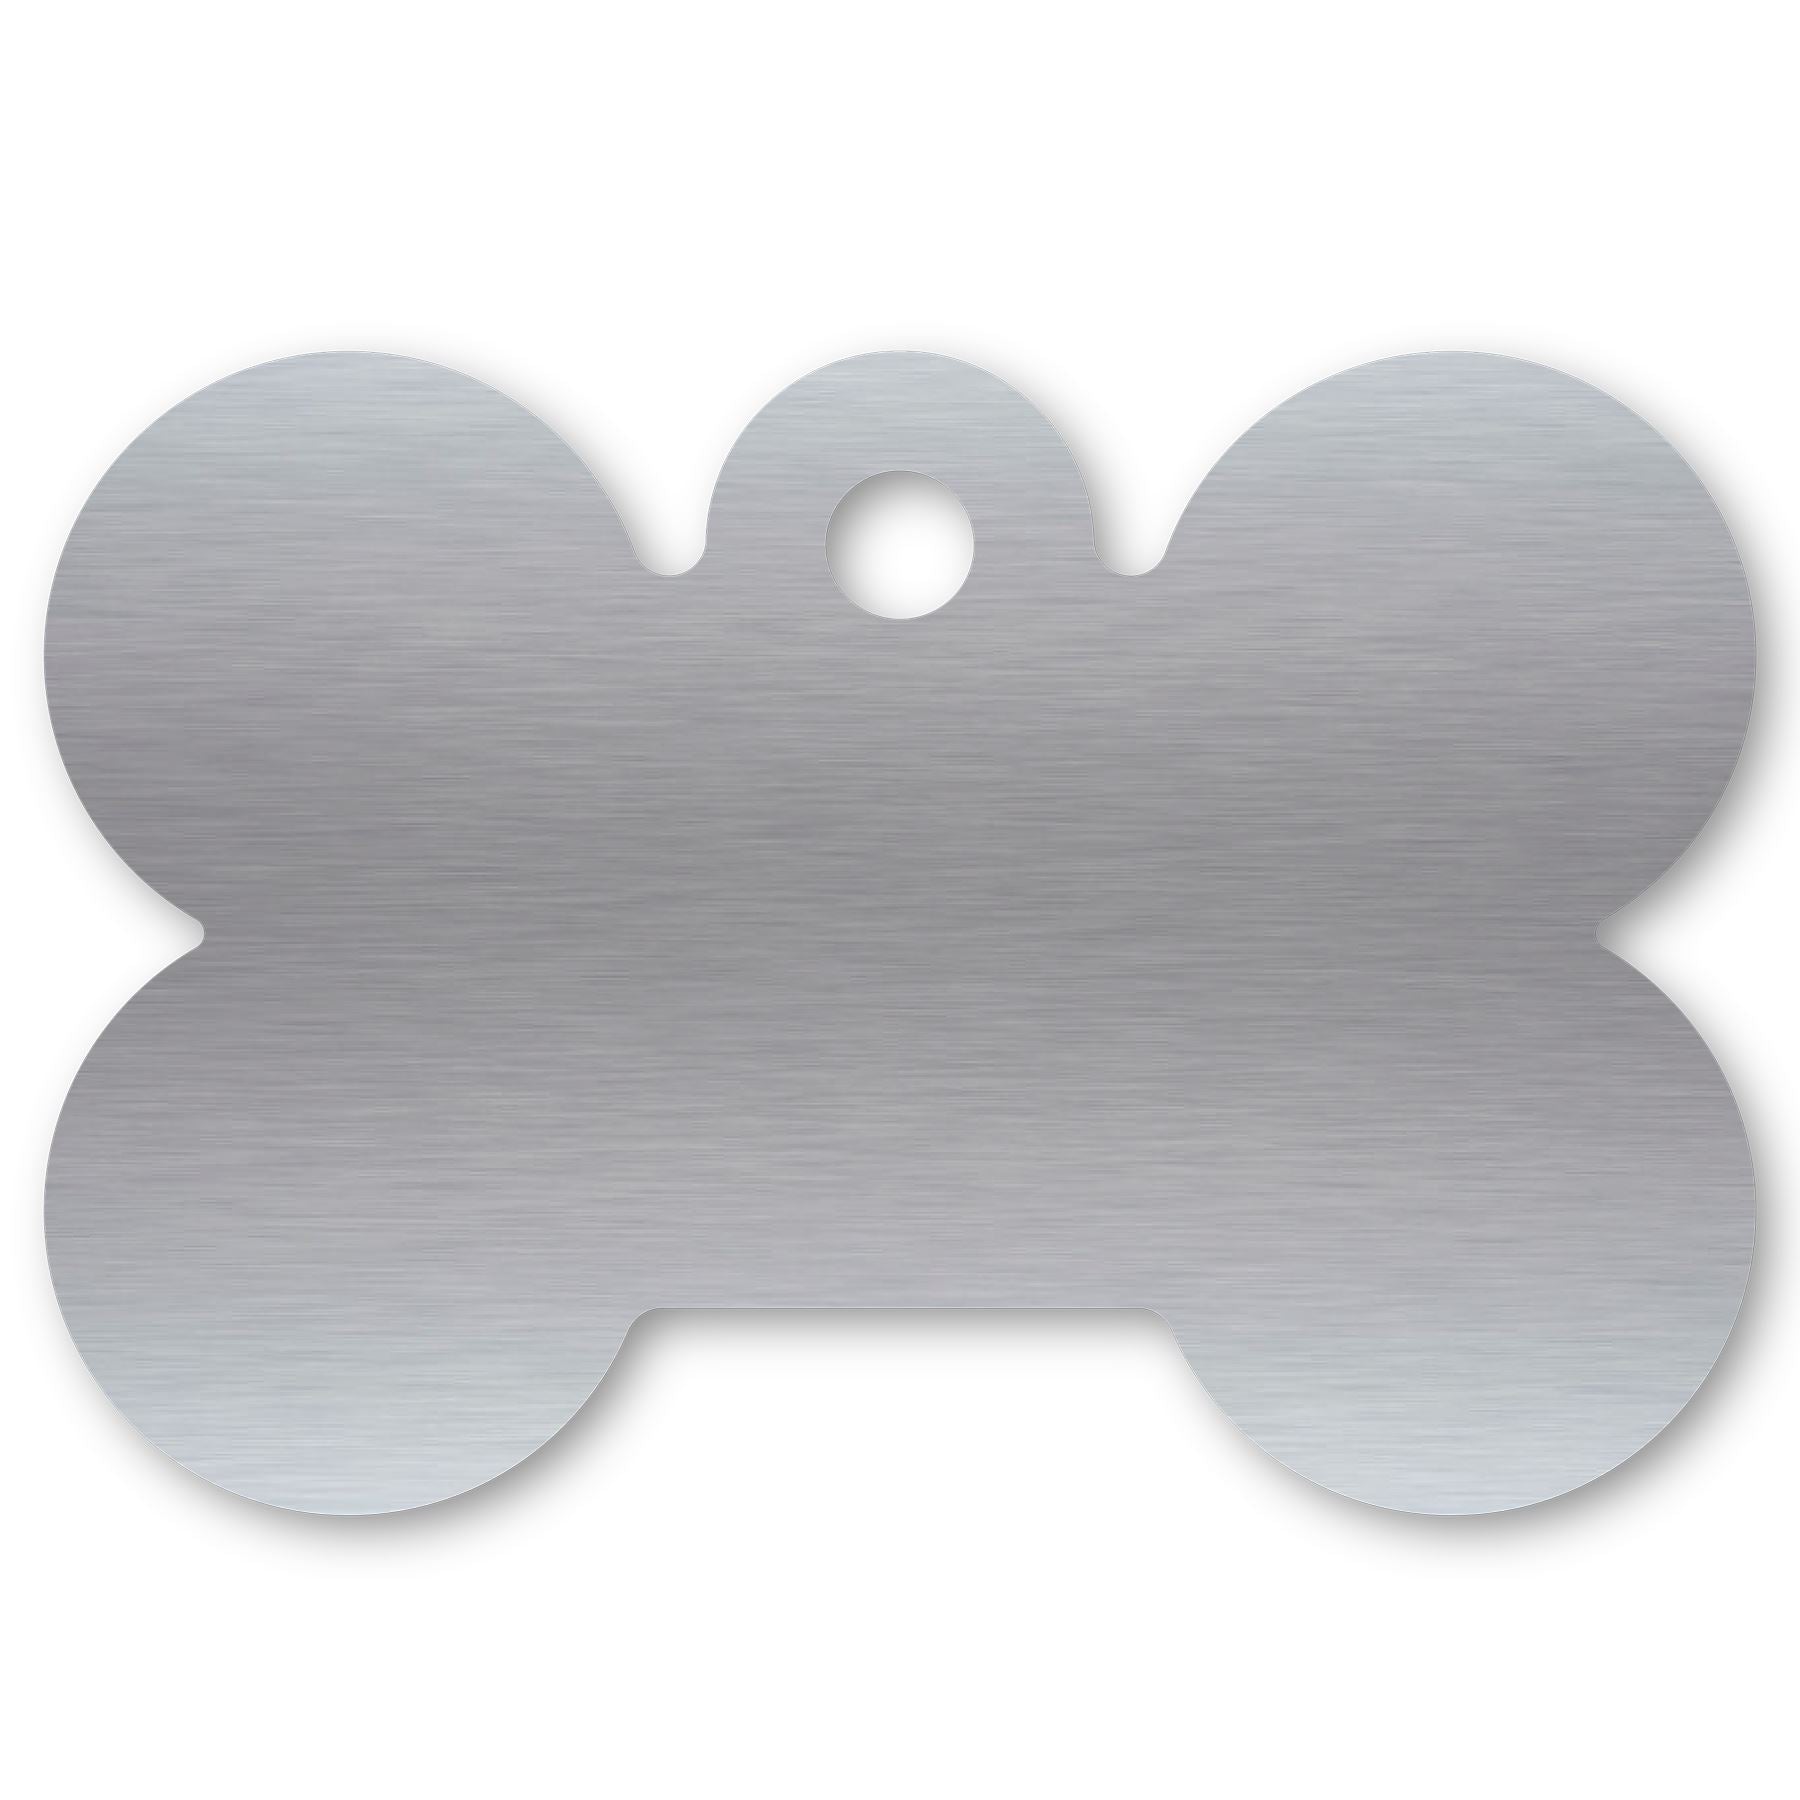 Anodized Aluminum Dog Bone Shaped Tags, 1-1/16" x 1-9/16" with 1/8" Hole, Laser Engraved Metal Tags Craftworks NW Silver 